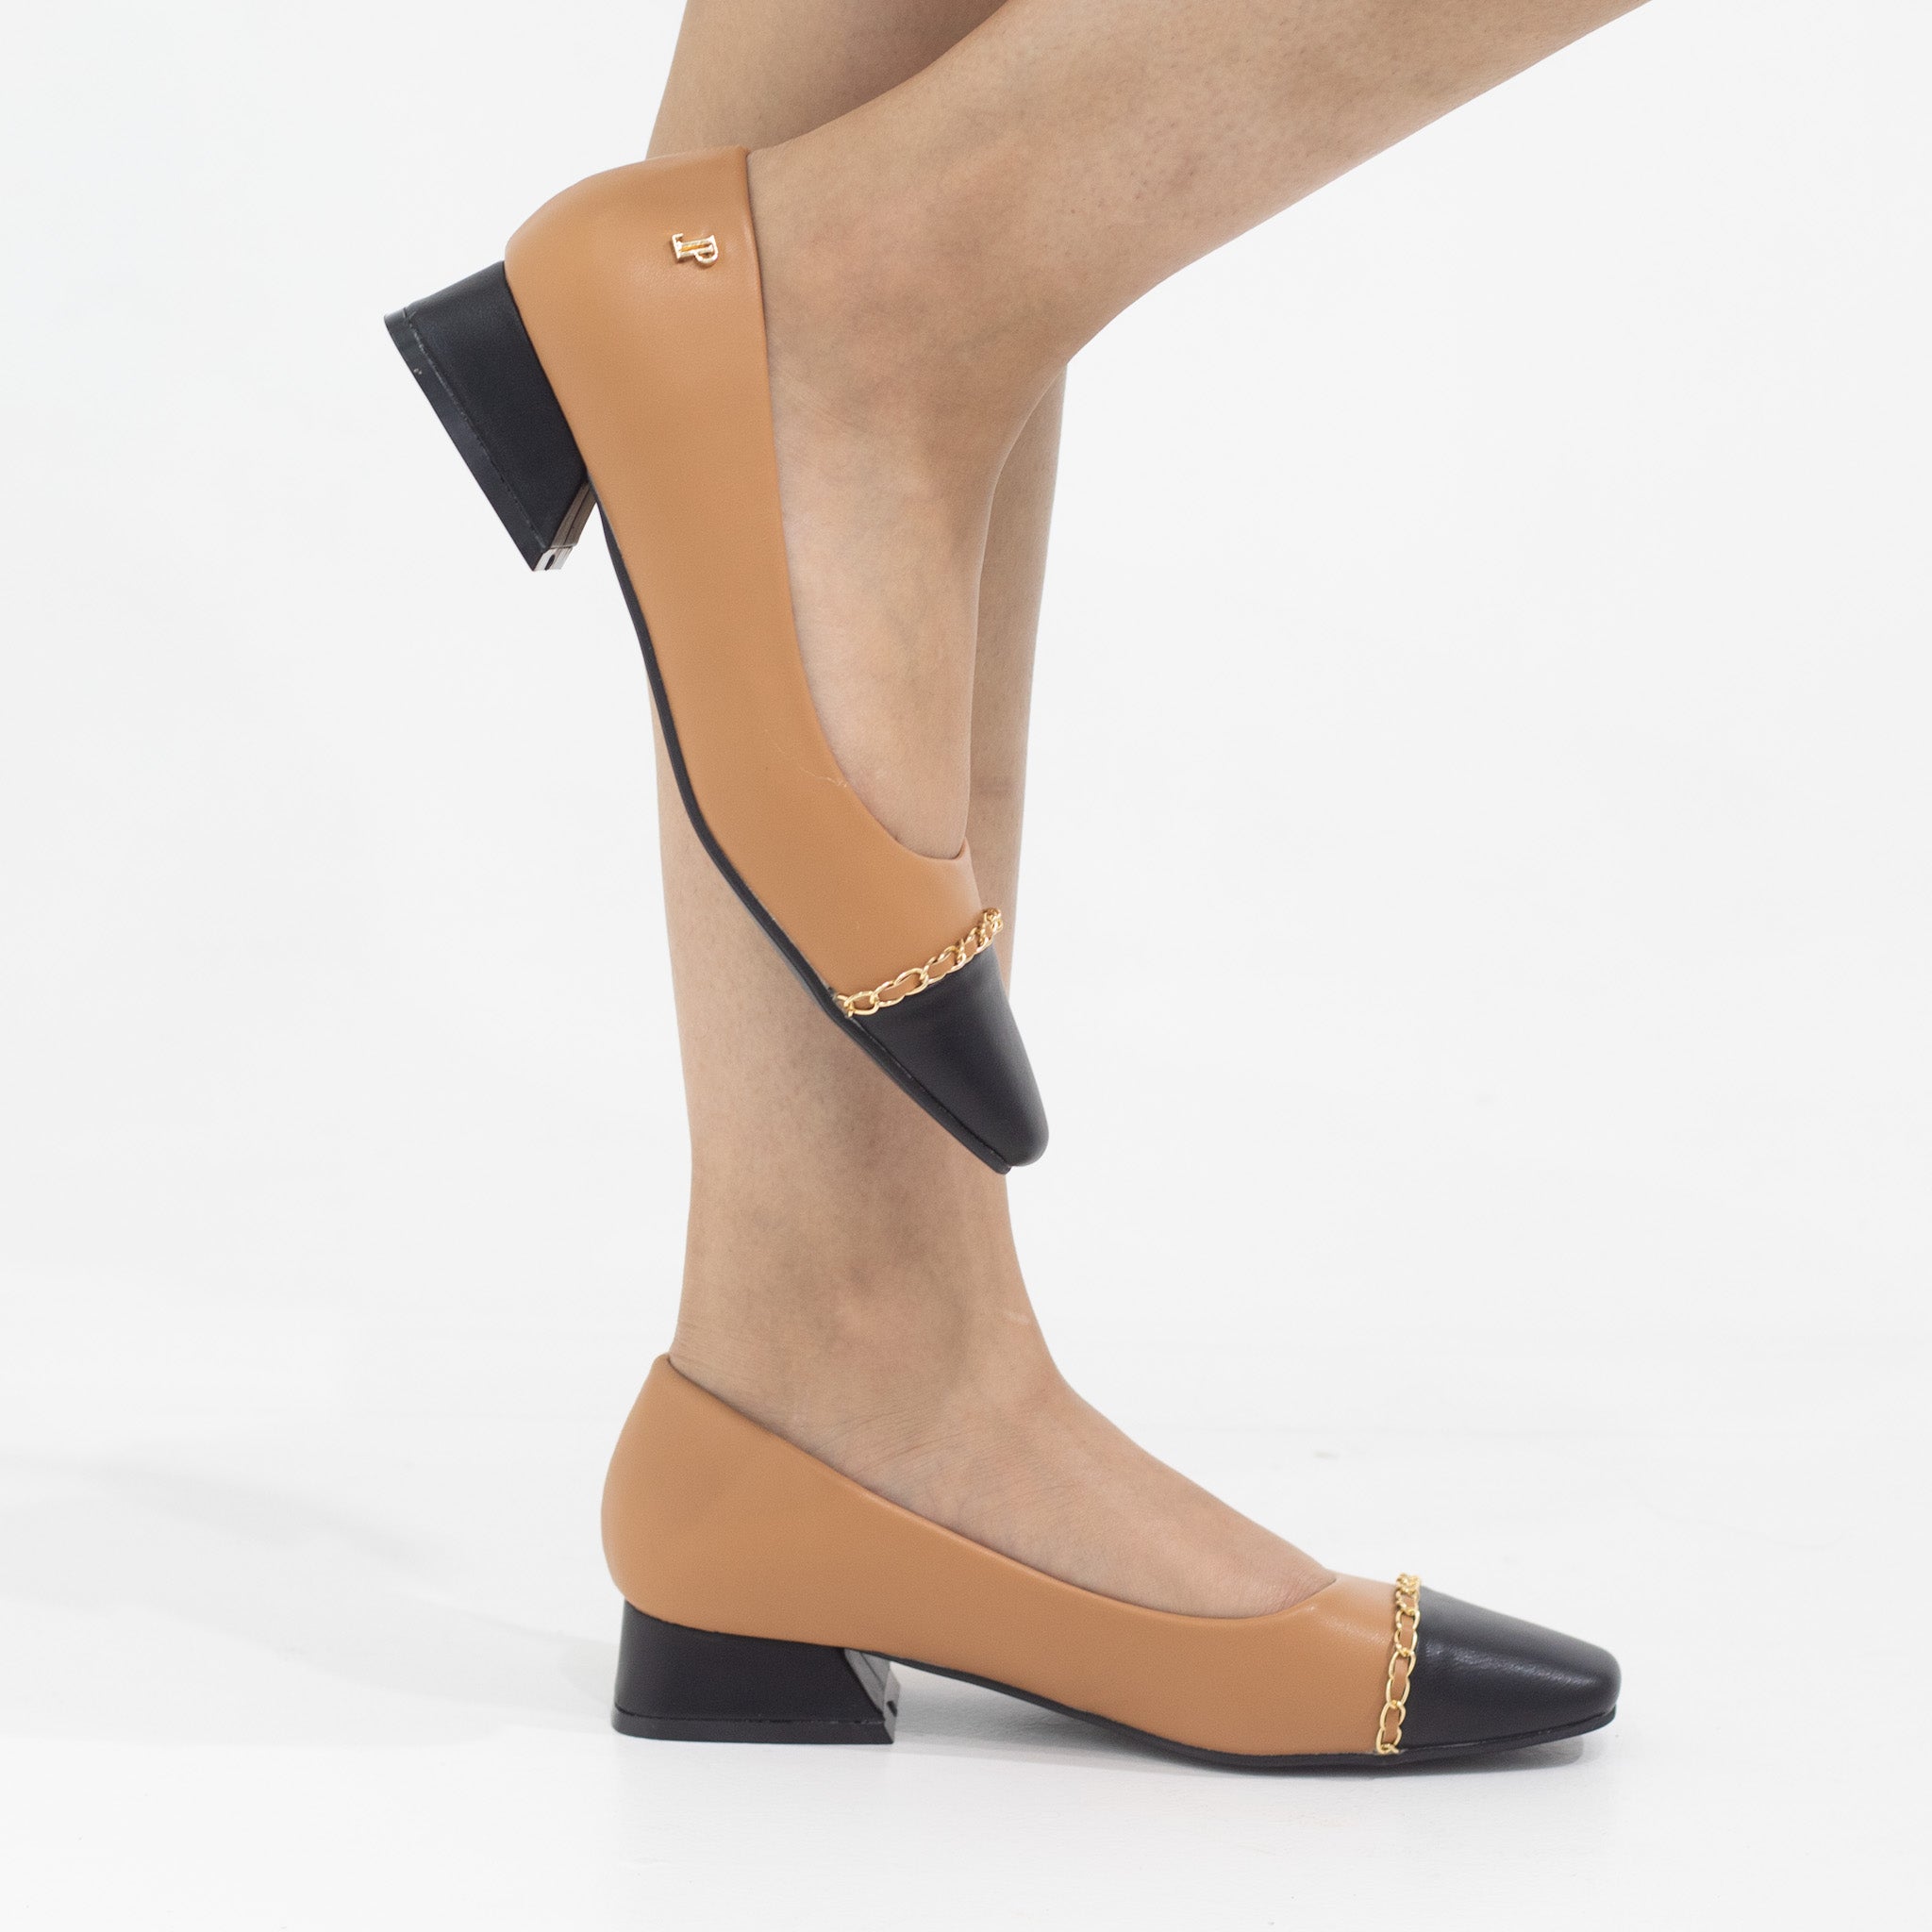 Camel two toned 2.5cm heel with court laika